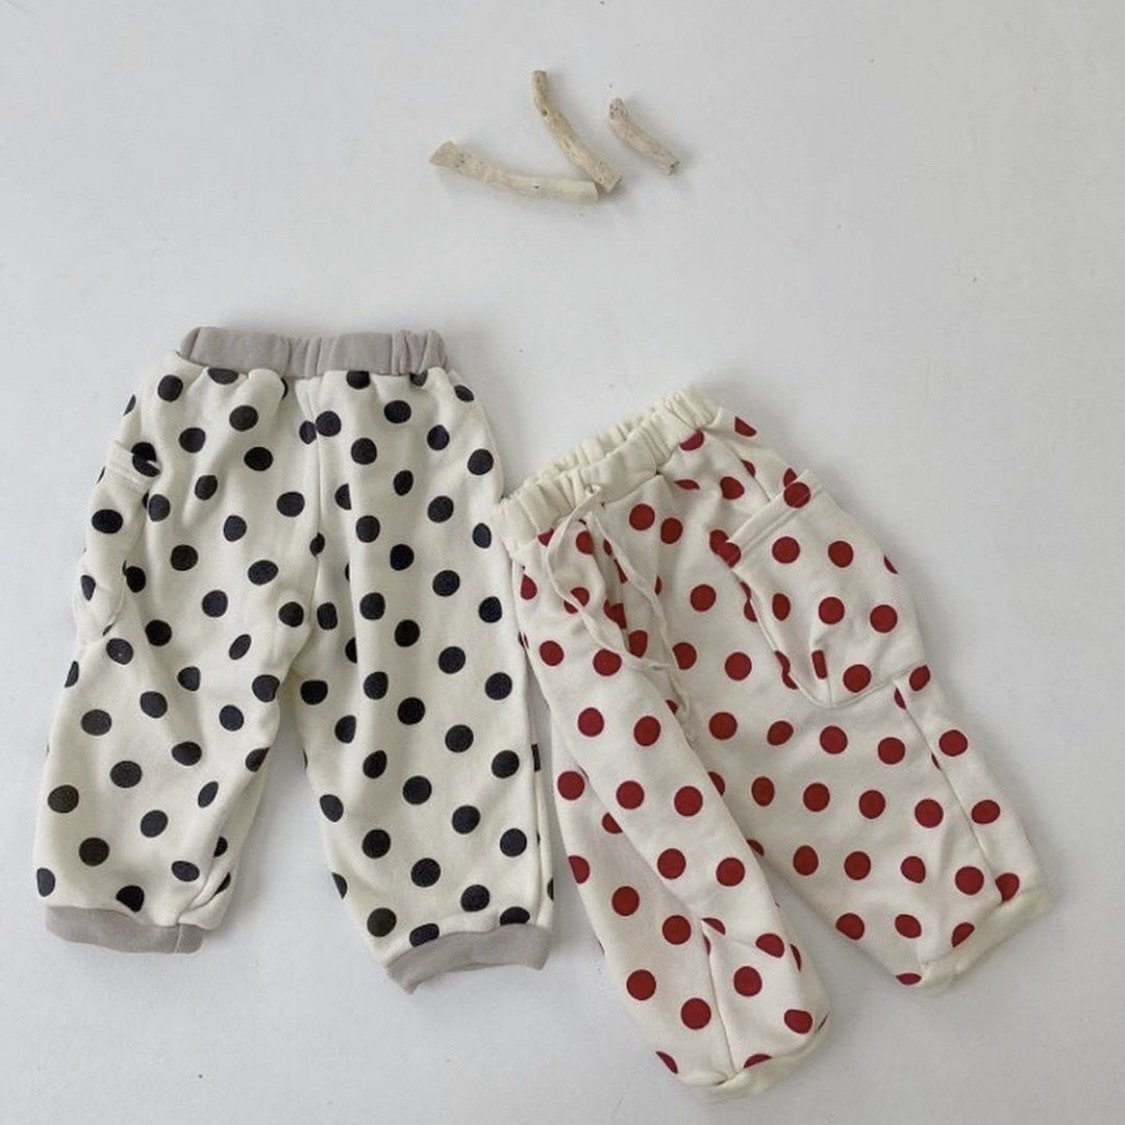 Simple Dot Joggers find Stylish Fashion for Little People- at Little Foxx Concept Store